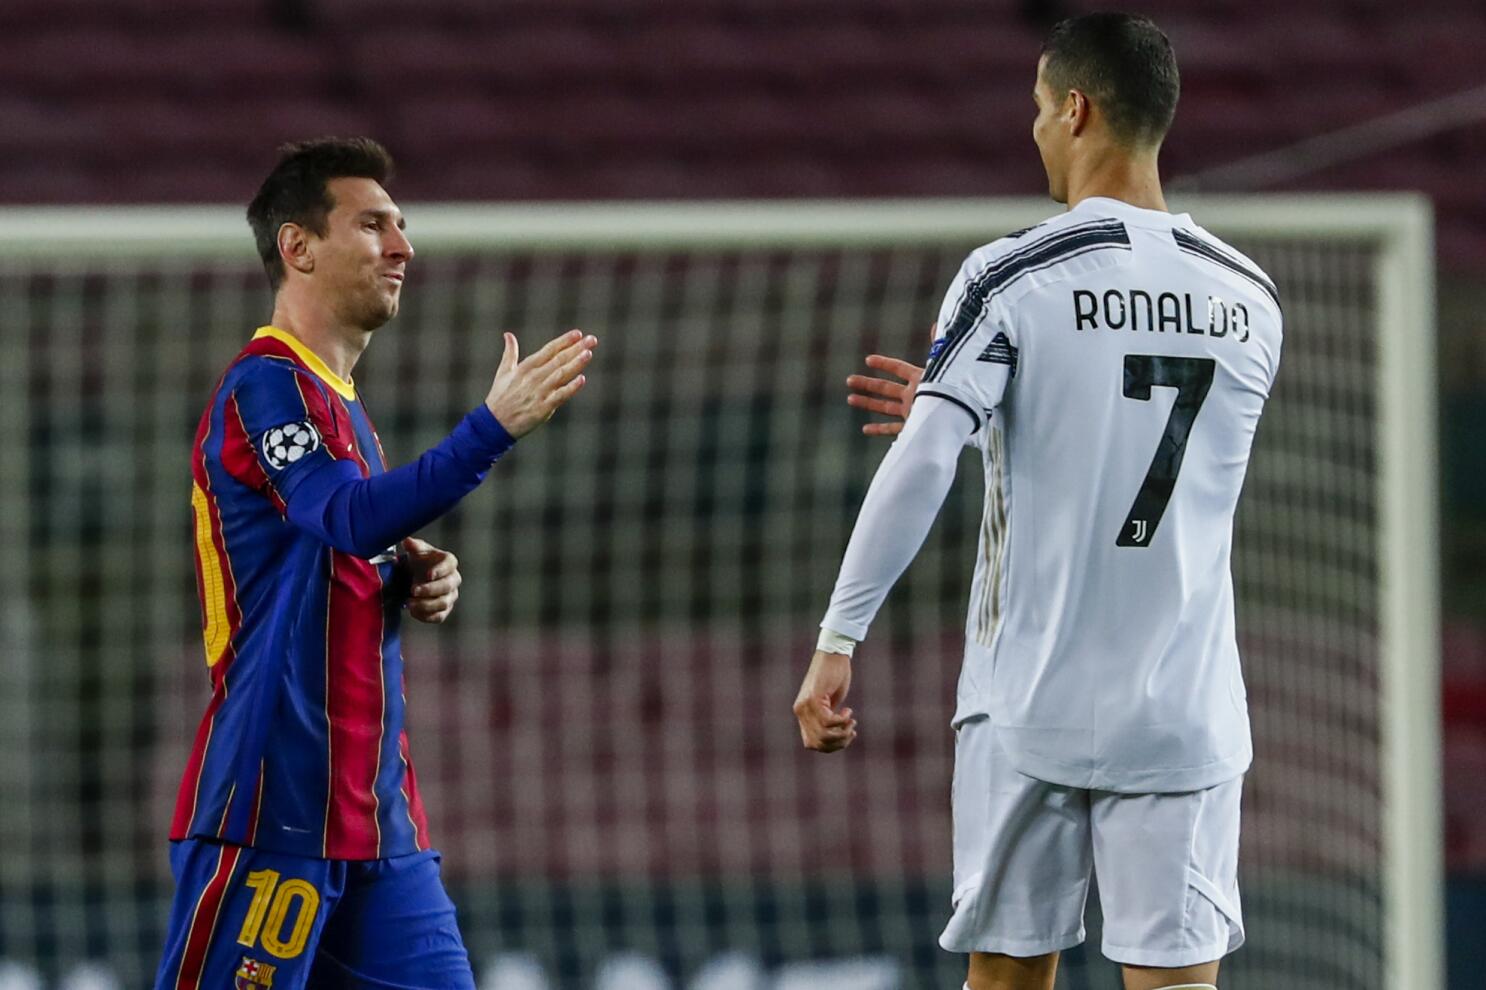 Ronaldo: Rivalry with Messi is over after sharing the stage for 15